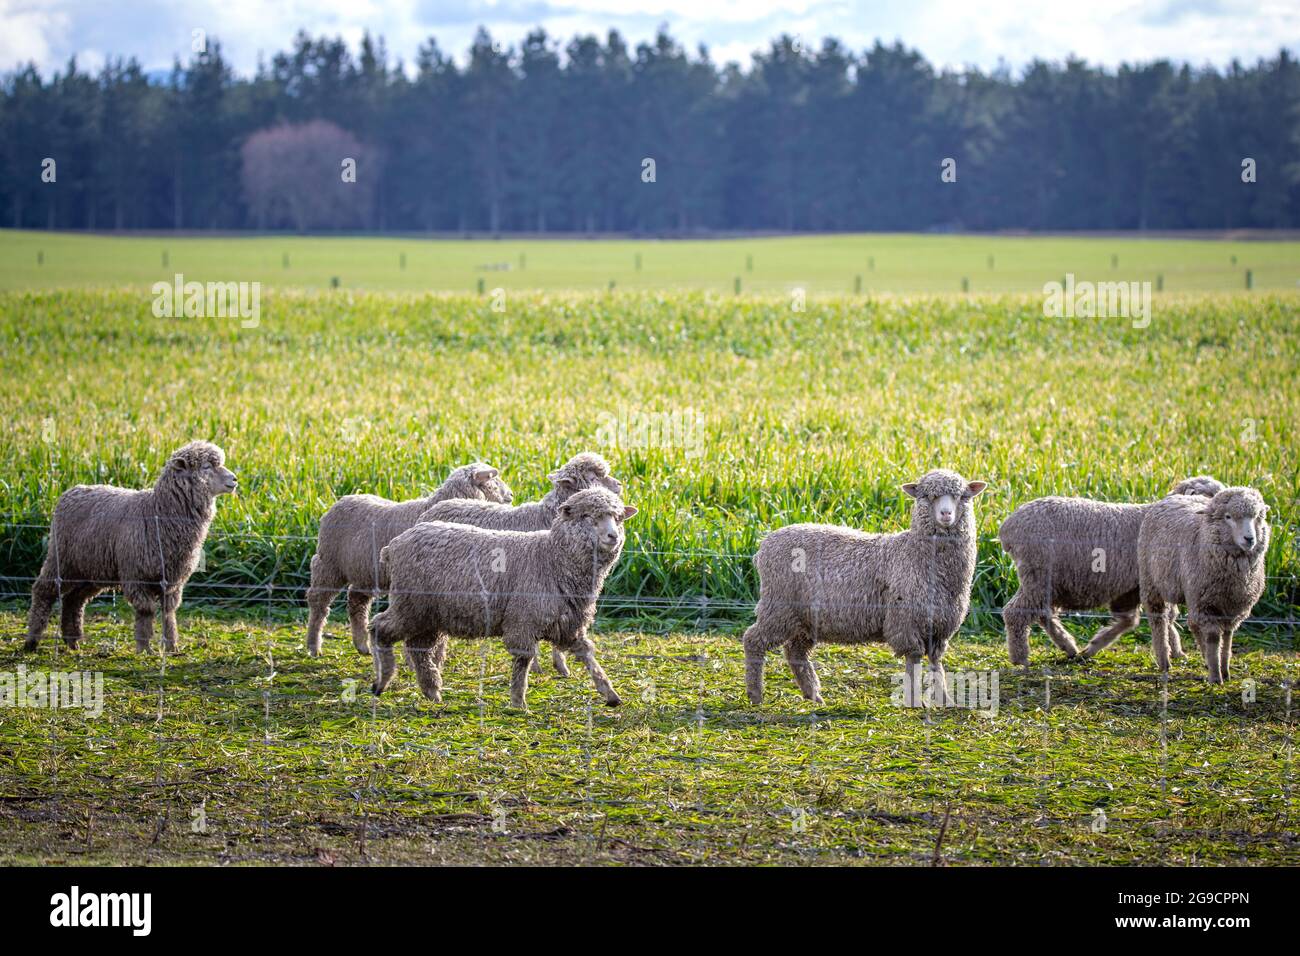 A flock of sheep on winter feed in a field on a farm in New Zealand Stock Photo